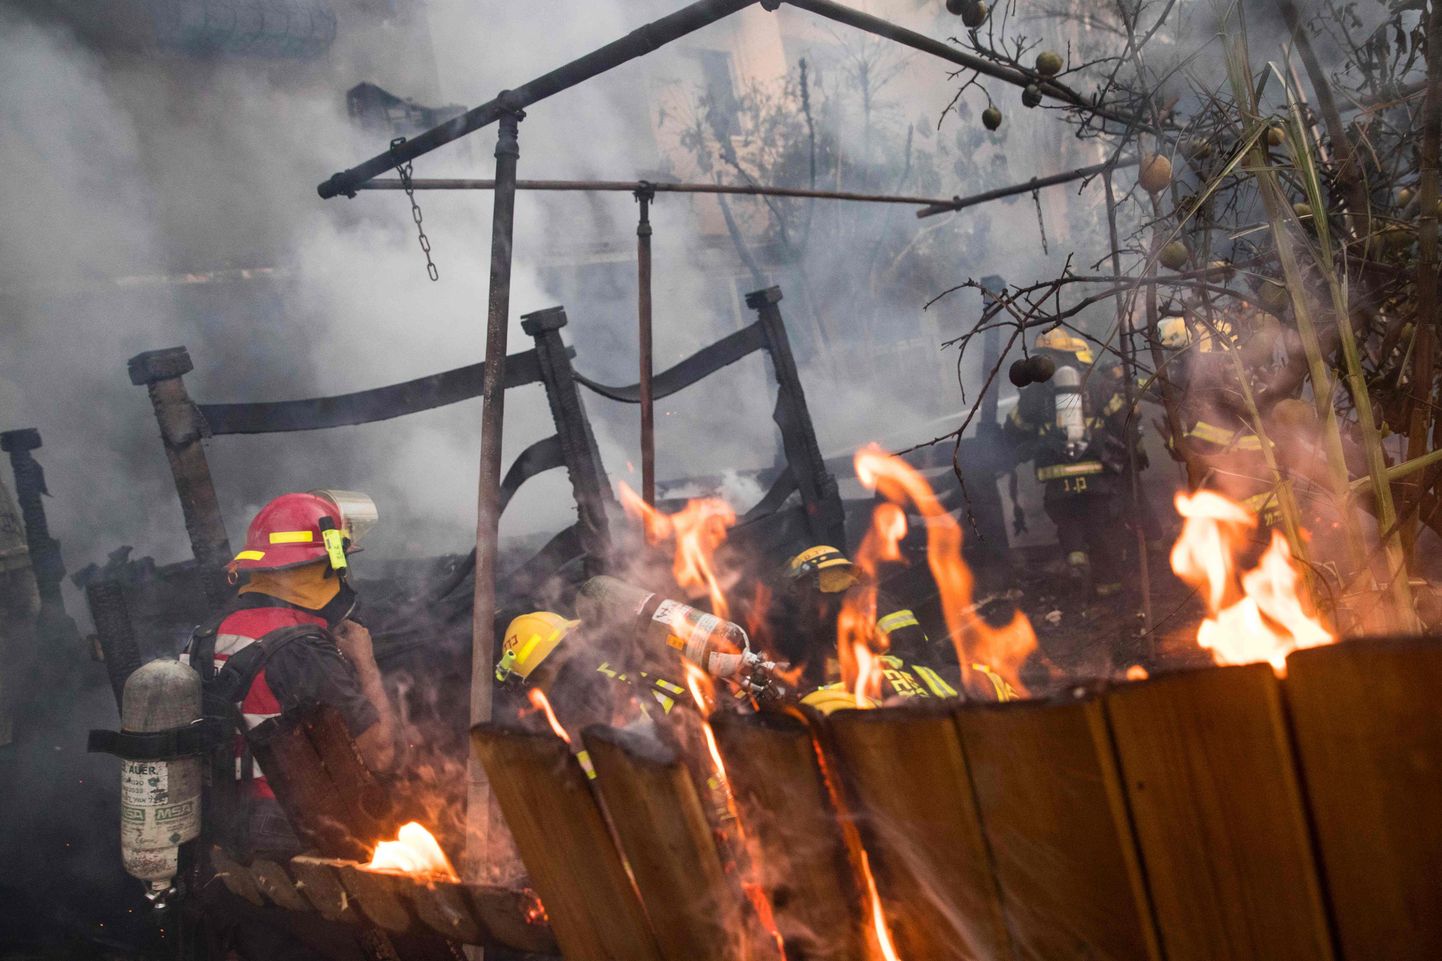 Israeli firefighters help extinguish a fire in the northern Israeli port city of Haifa on November 24, 2016.

Hundreds of Israelis fled their homes on the outskirts of the country's third city Haifa with others trapped inside as firefighters struggled to control raging bushfires, officials said. / AFP PHOTO / JACK GUEZ